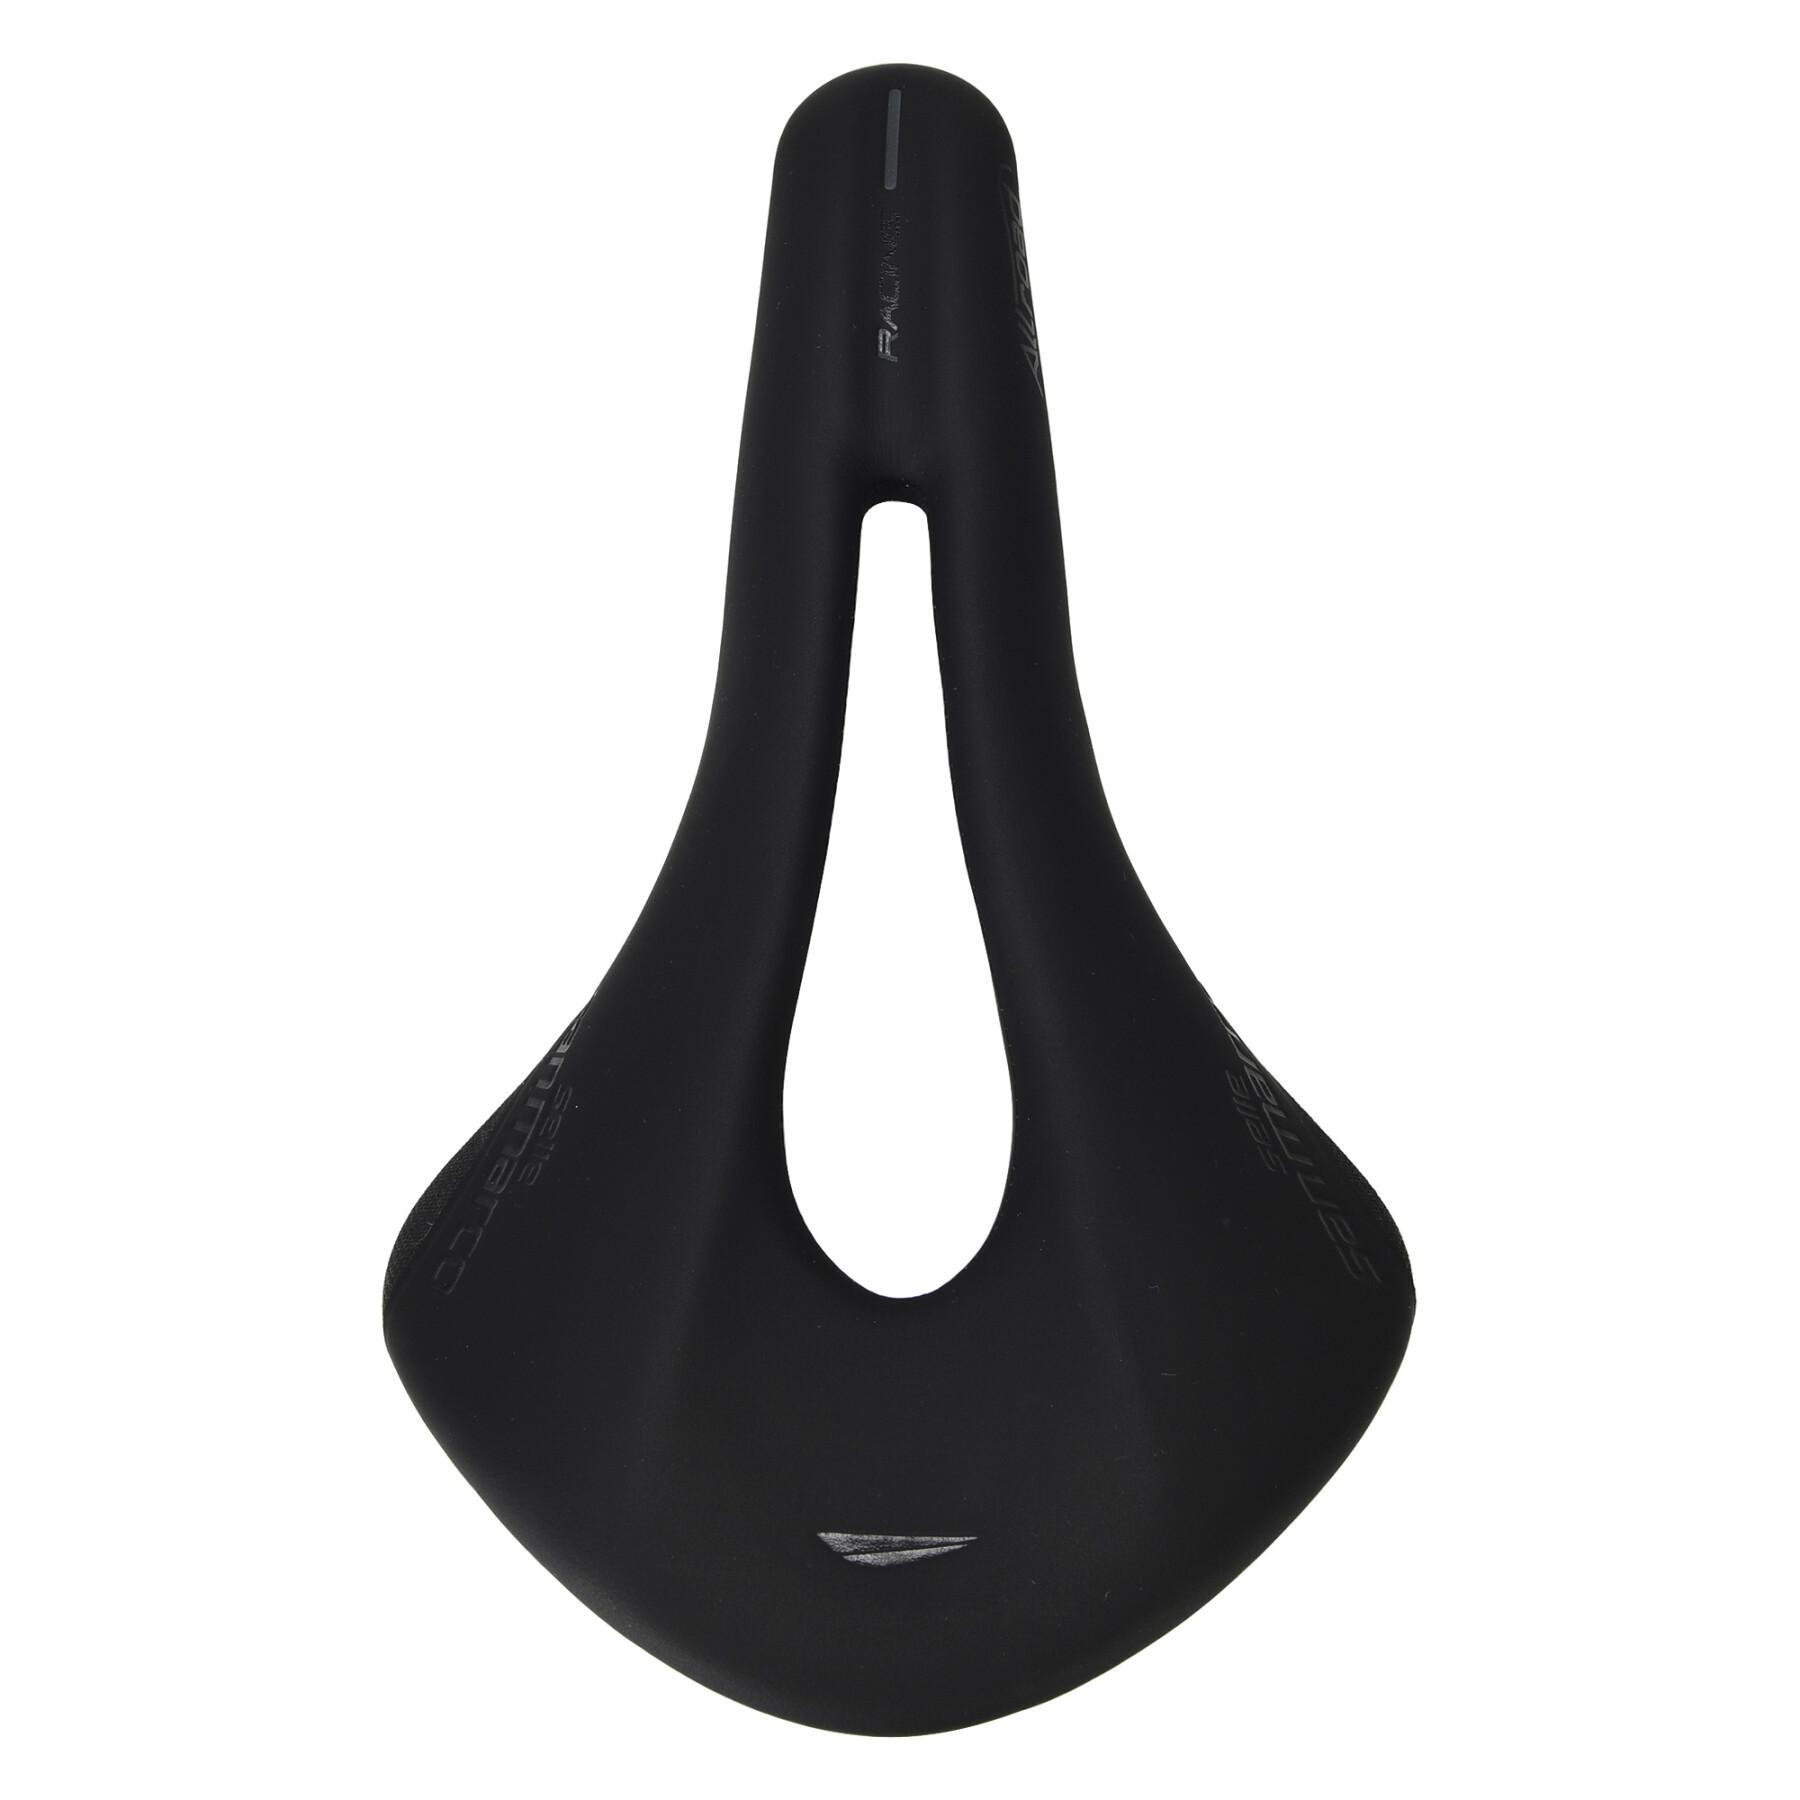 Selle Selle San Marco Allroad Open-Fit Racing